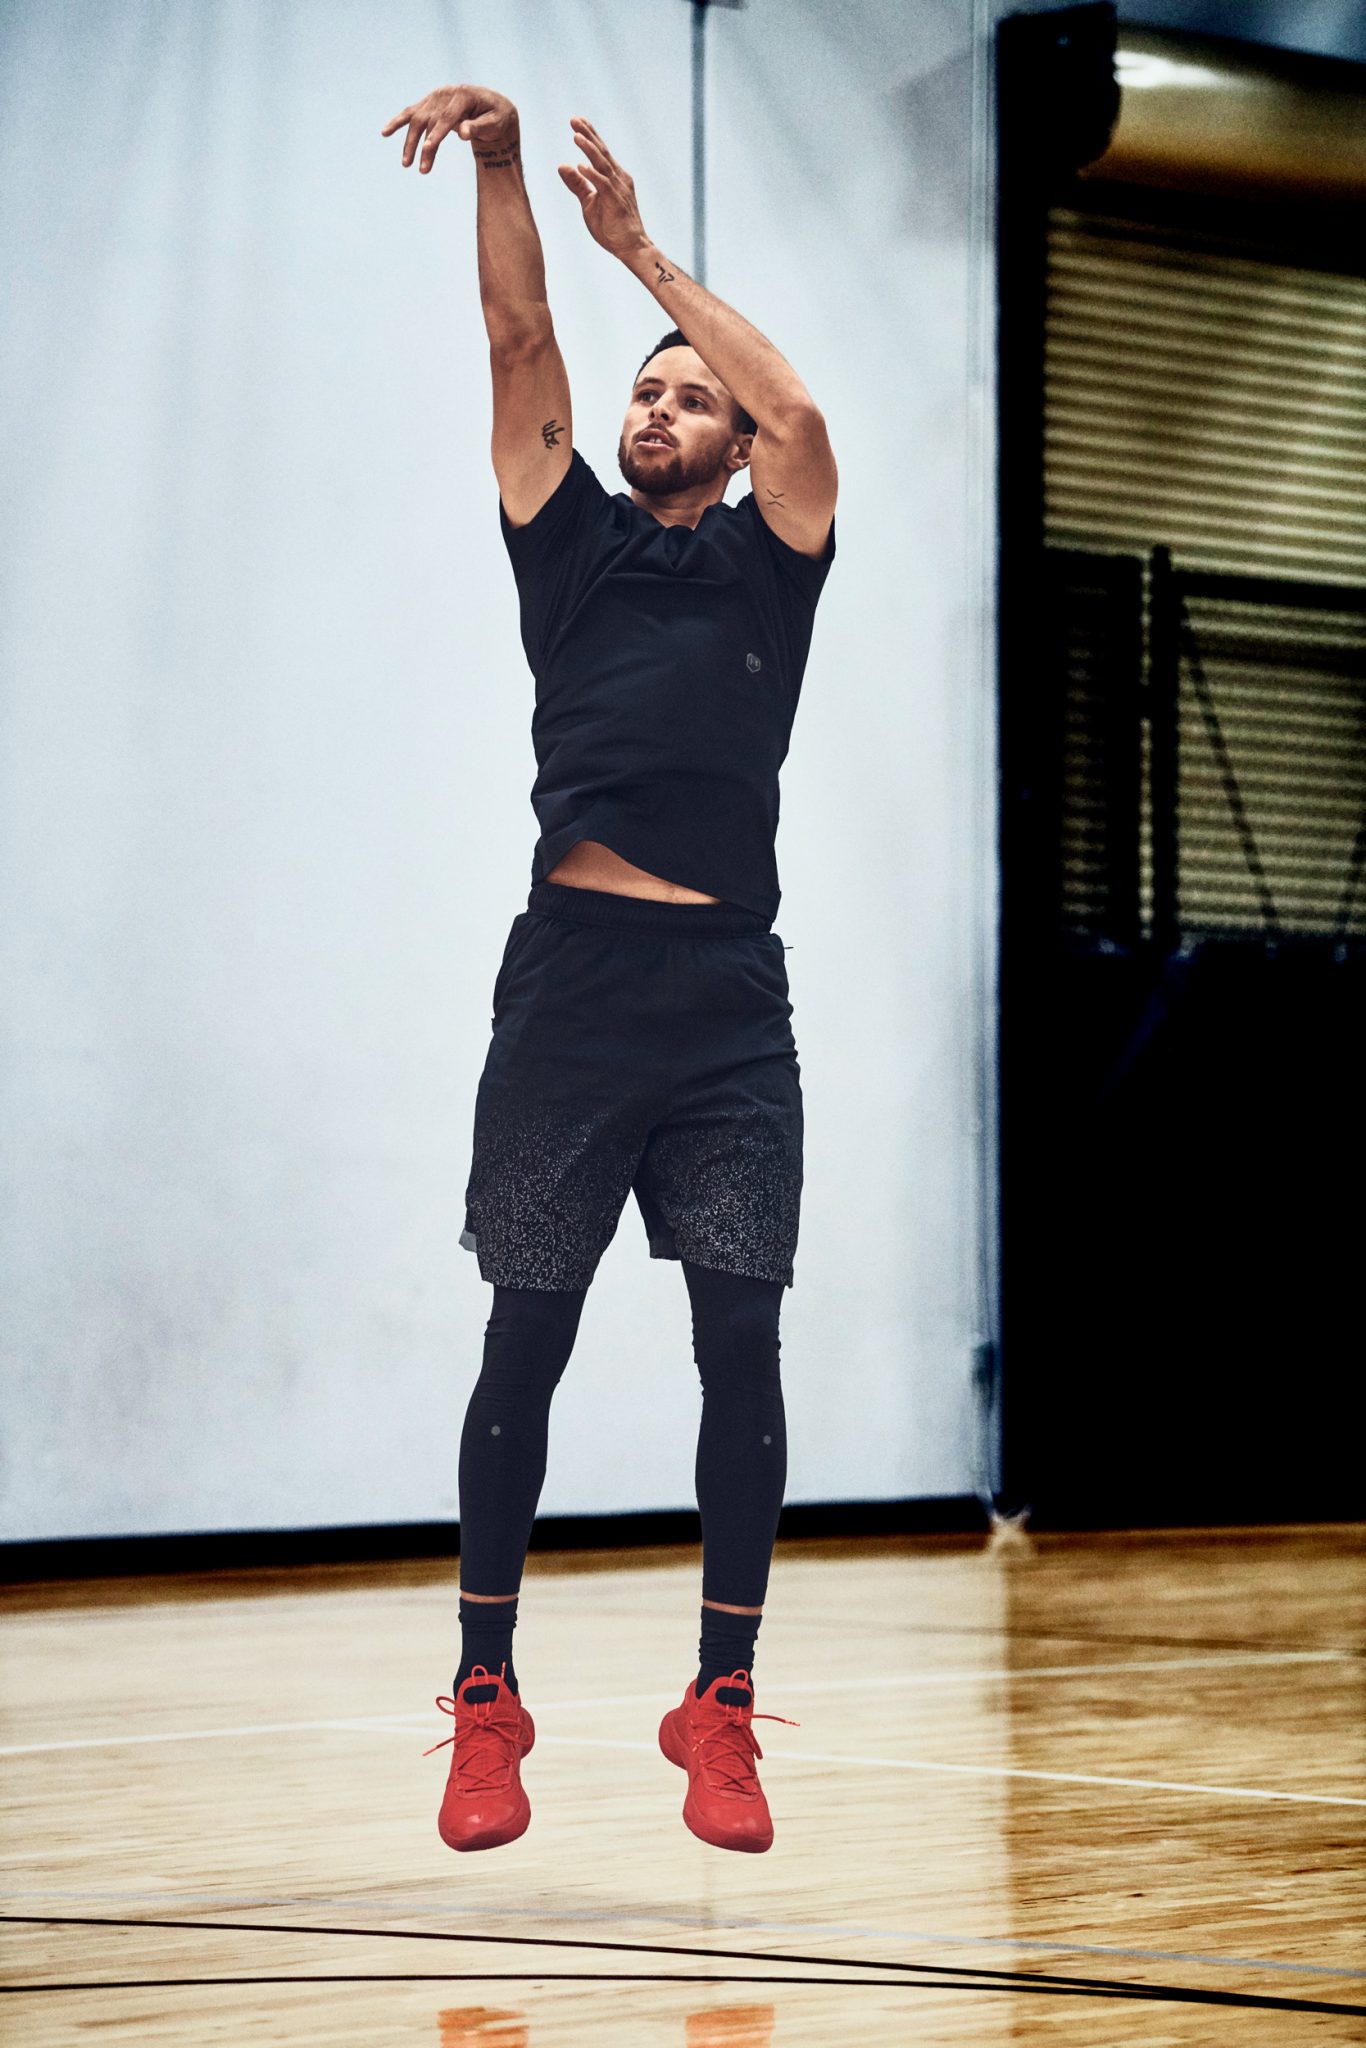 With the Under Armour Rush line, you can virtually train like Stephen Curry